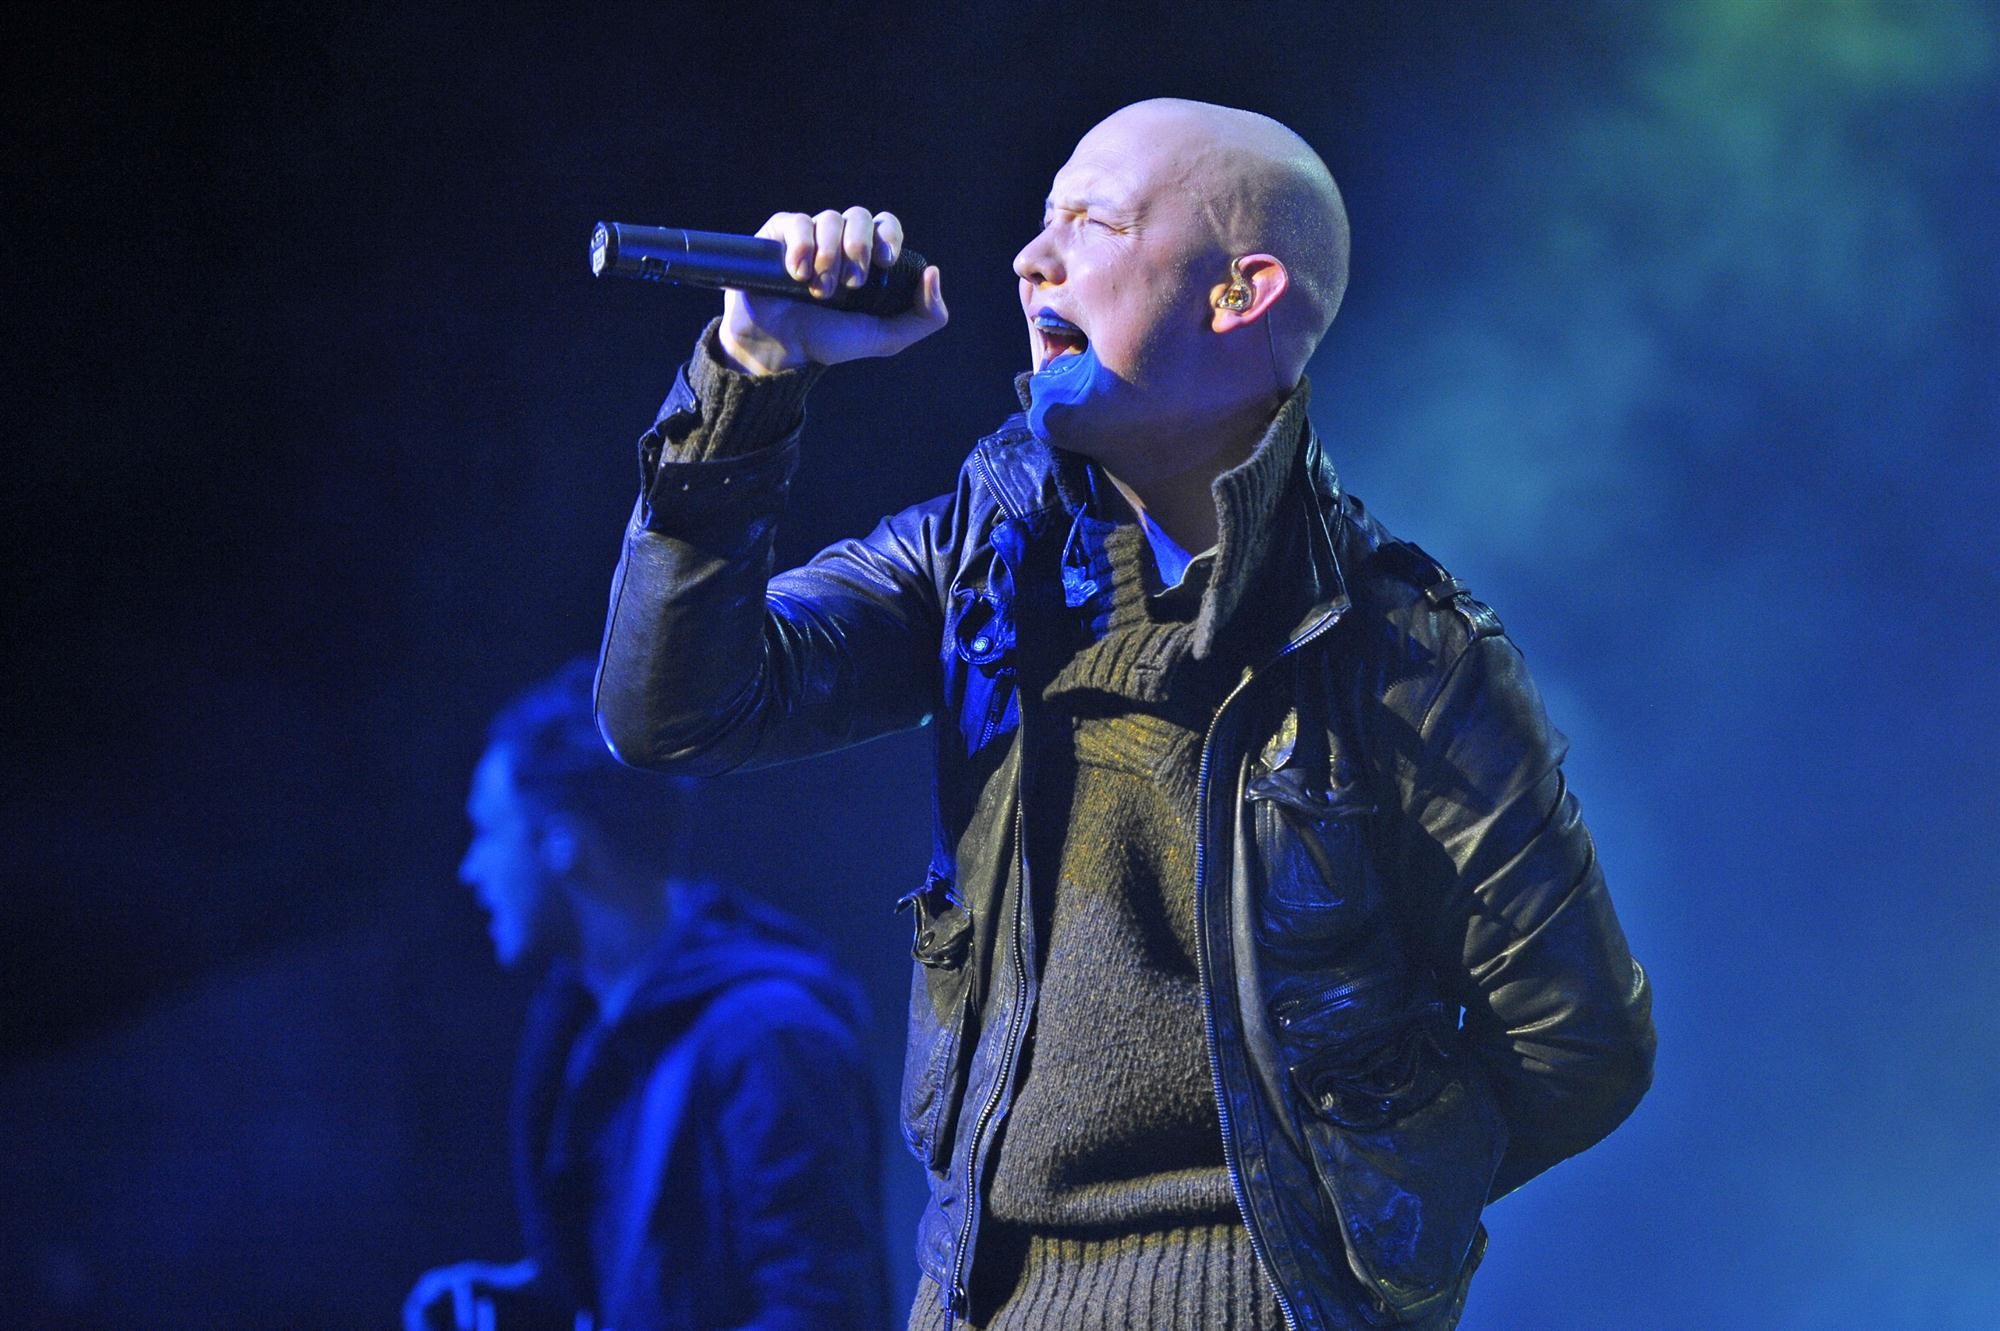 The Fray - Kelly Clarkson,Christina Perri Performances at the Chicago Theatre | Picture 134778